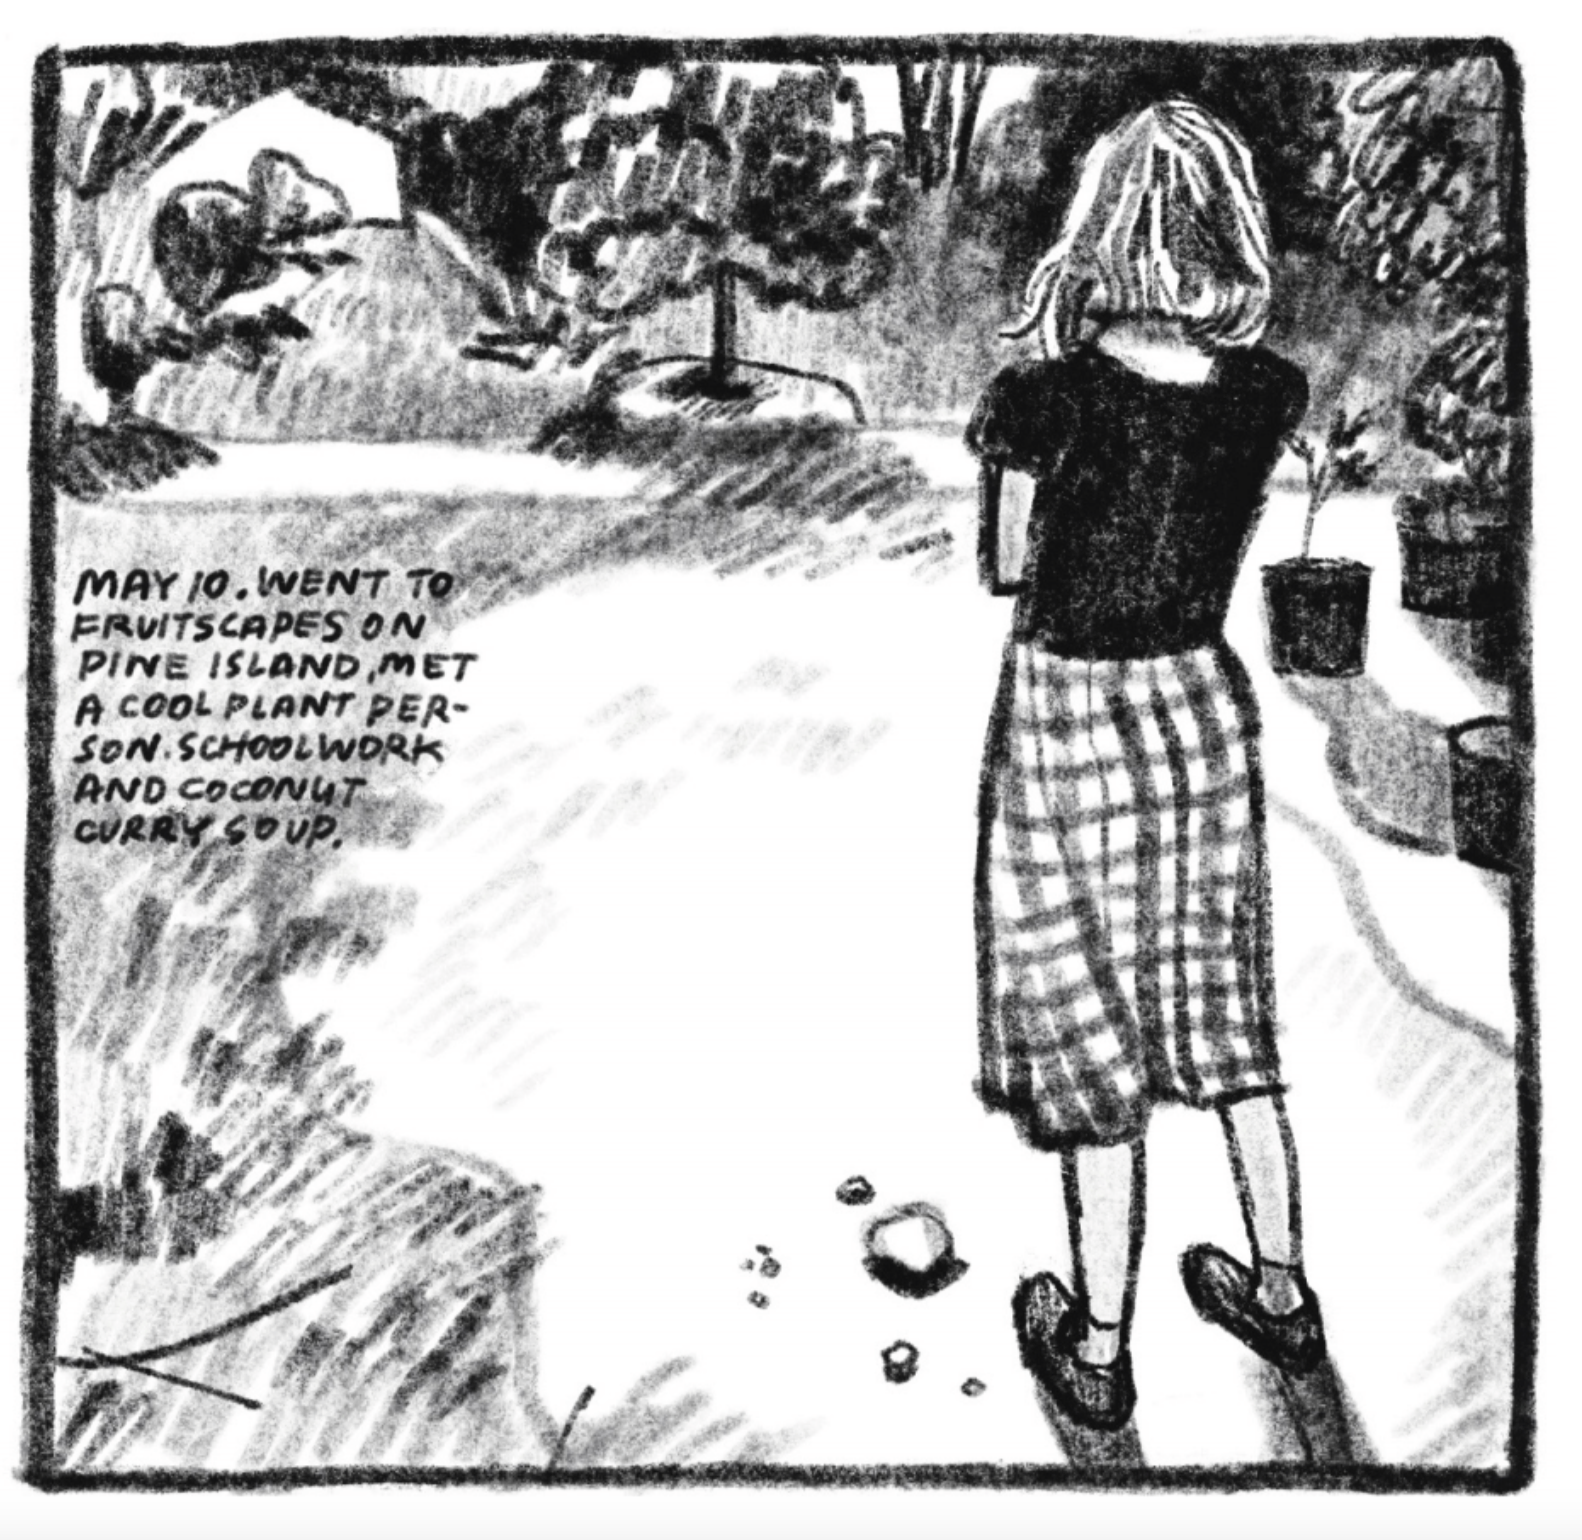 Kim wears a black, short-sleeved blouse a knee-length, checkered skirt, and black loafers.  Back turned to the reader, she looks ahead at the scene in front of her: a field of grass lined by potted plants and a planted trees. 

"May 10. Went to Fruitscapes on Pine Island, met a cool plant person. Schoolwork and coconut curry soup."